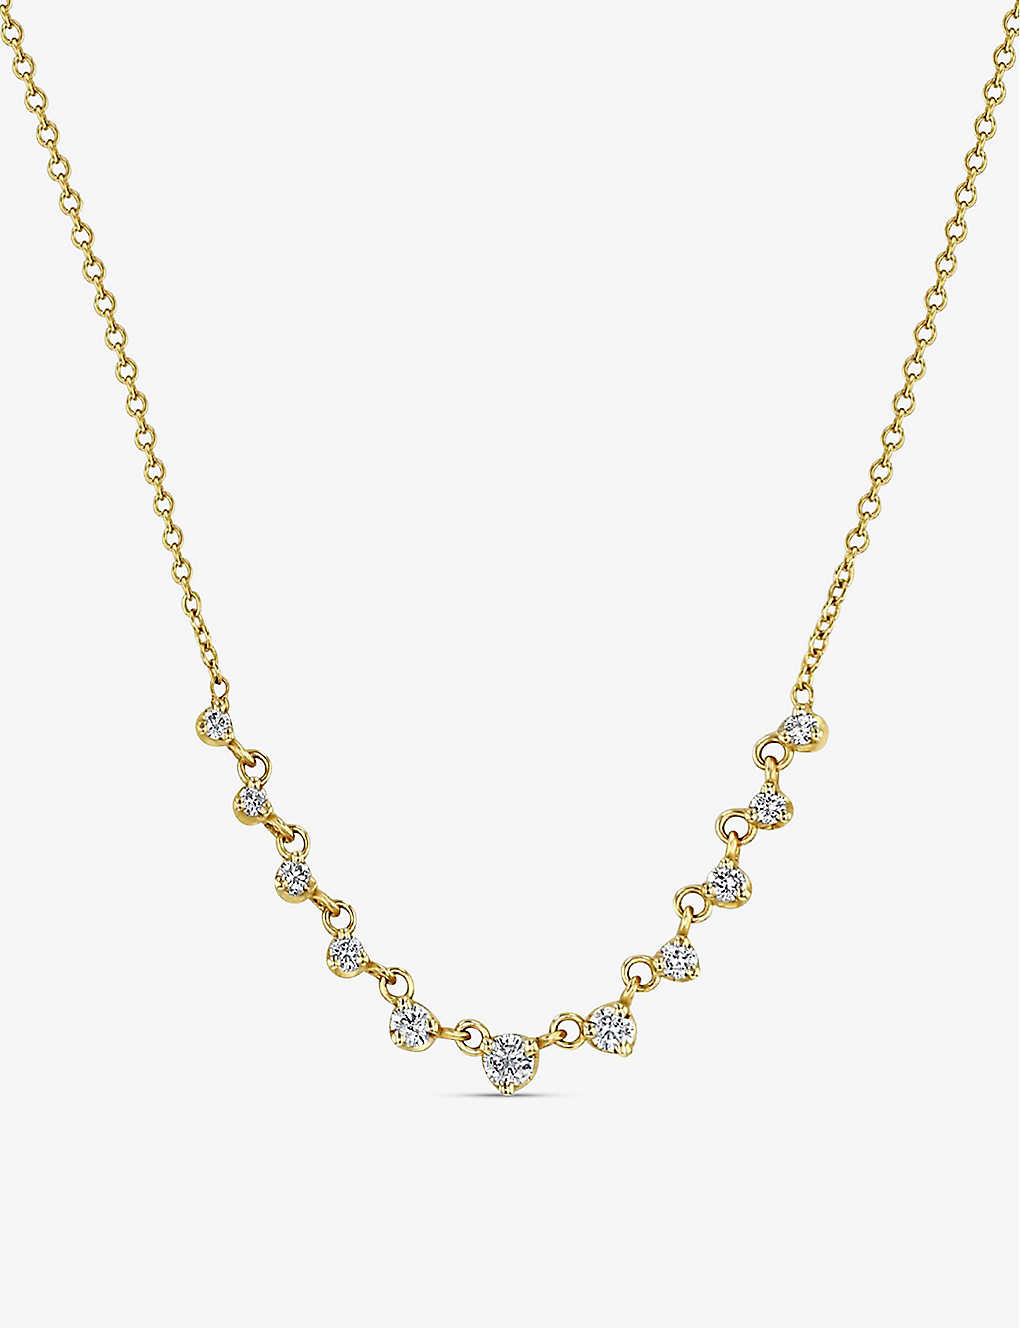 The Alkemistry Womens Yellow Gold Zoe Chicco Graduated 14ct Yellow-gold And 0.25ct Diamond Necklace